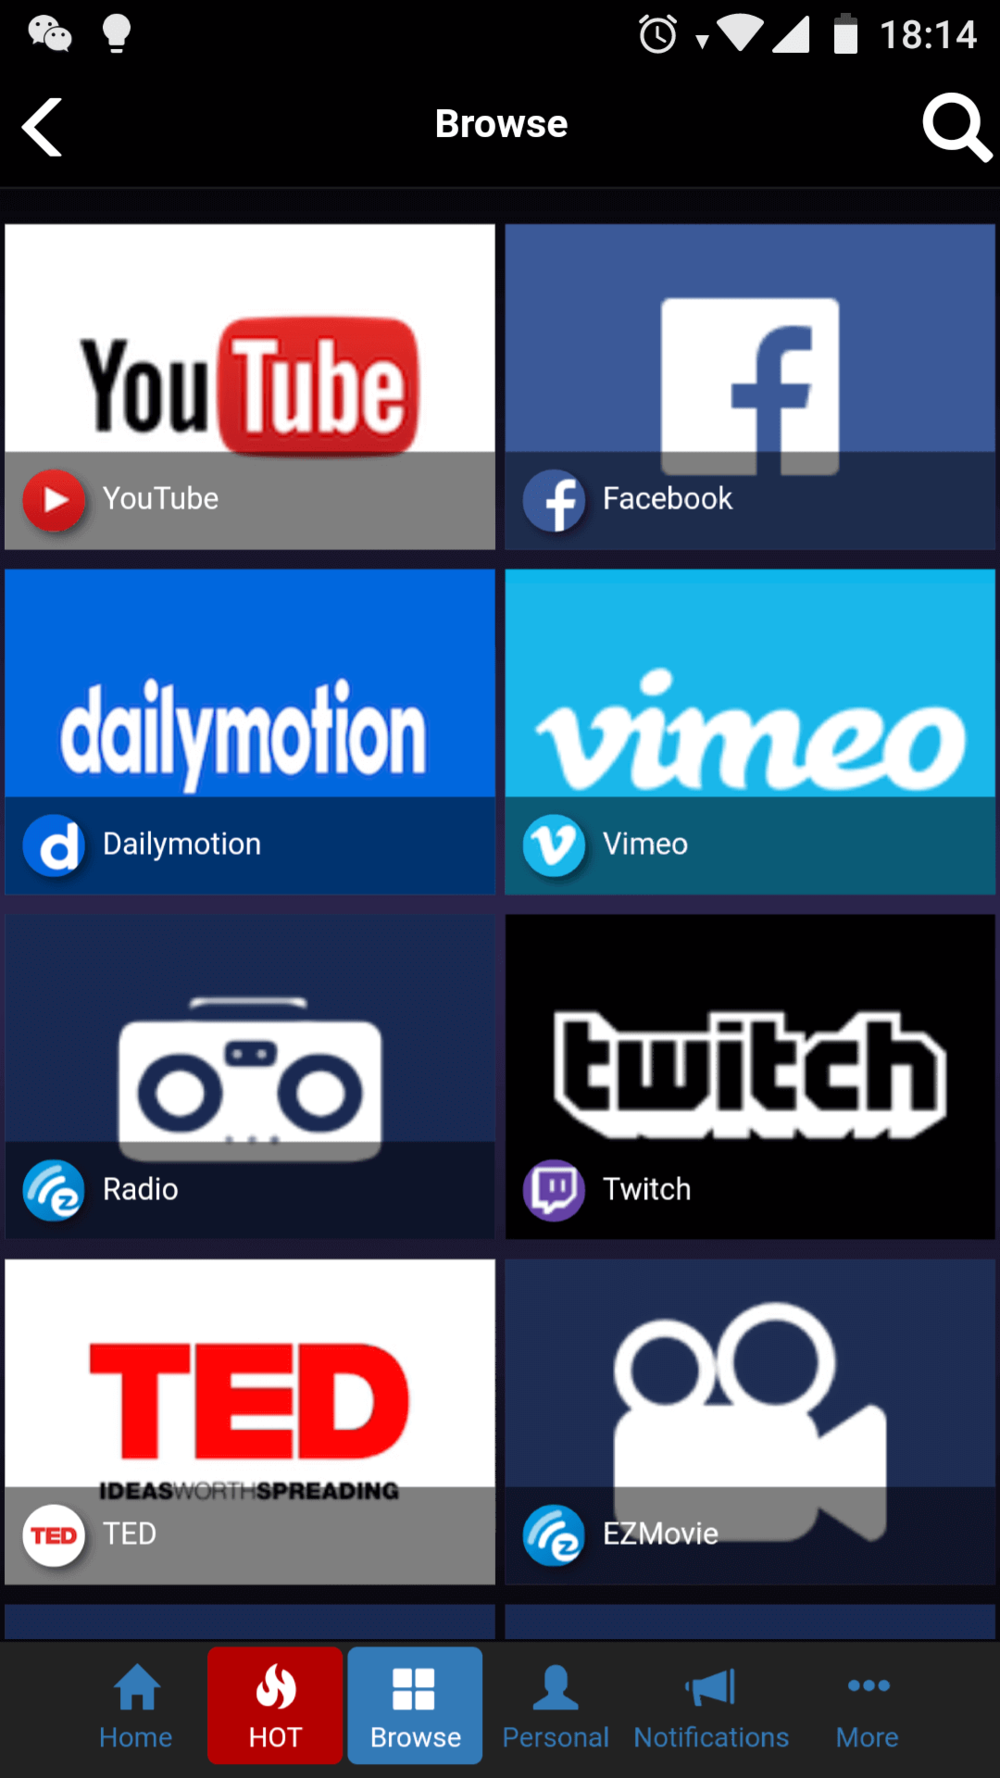 Watch videos from different platforms all in one place.